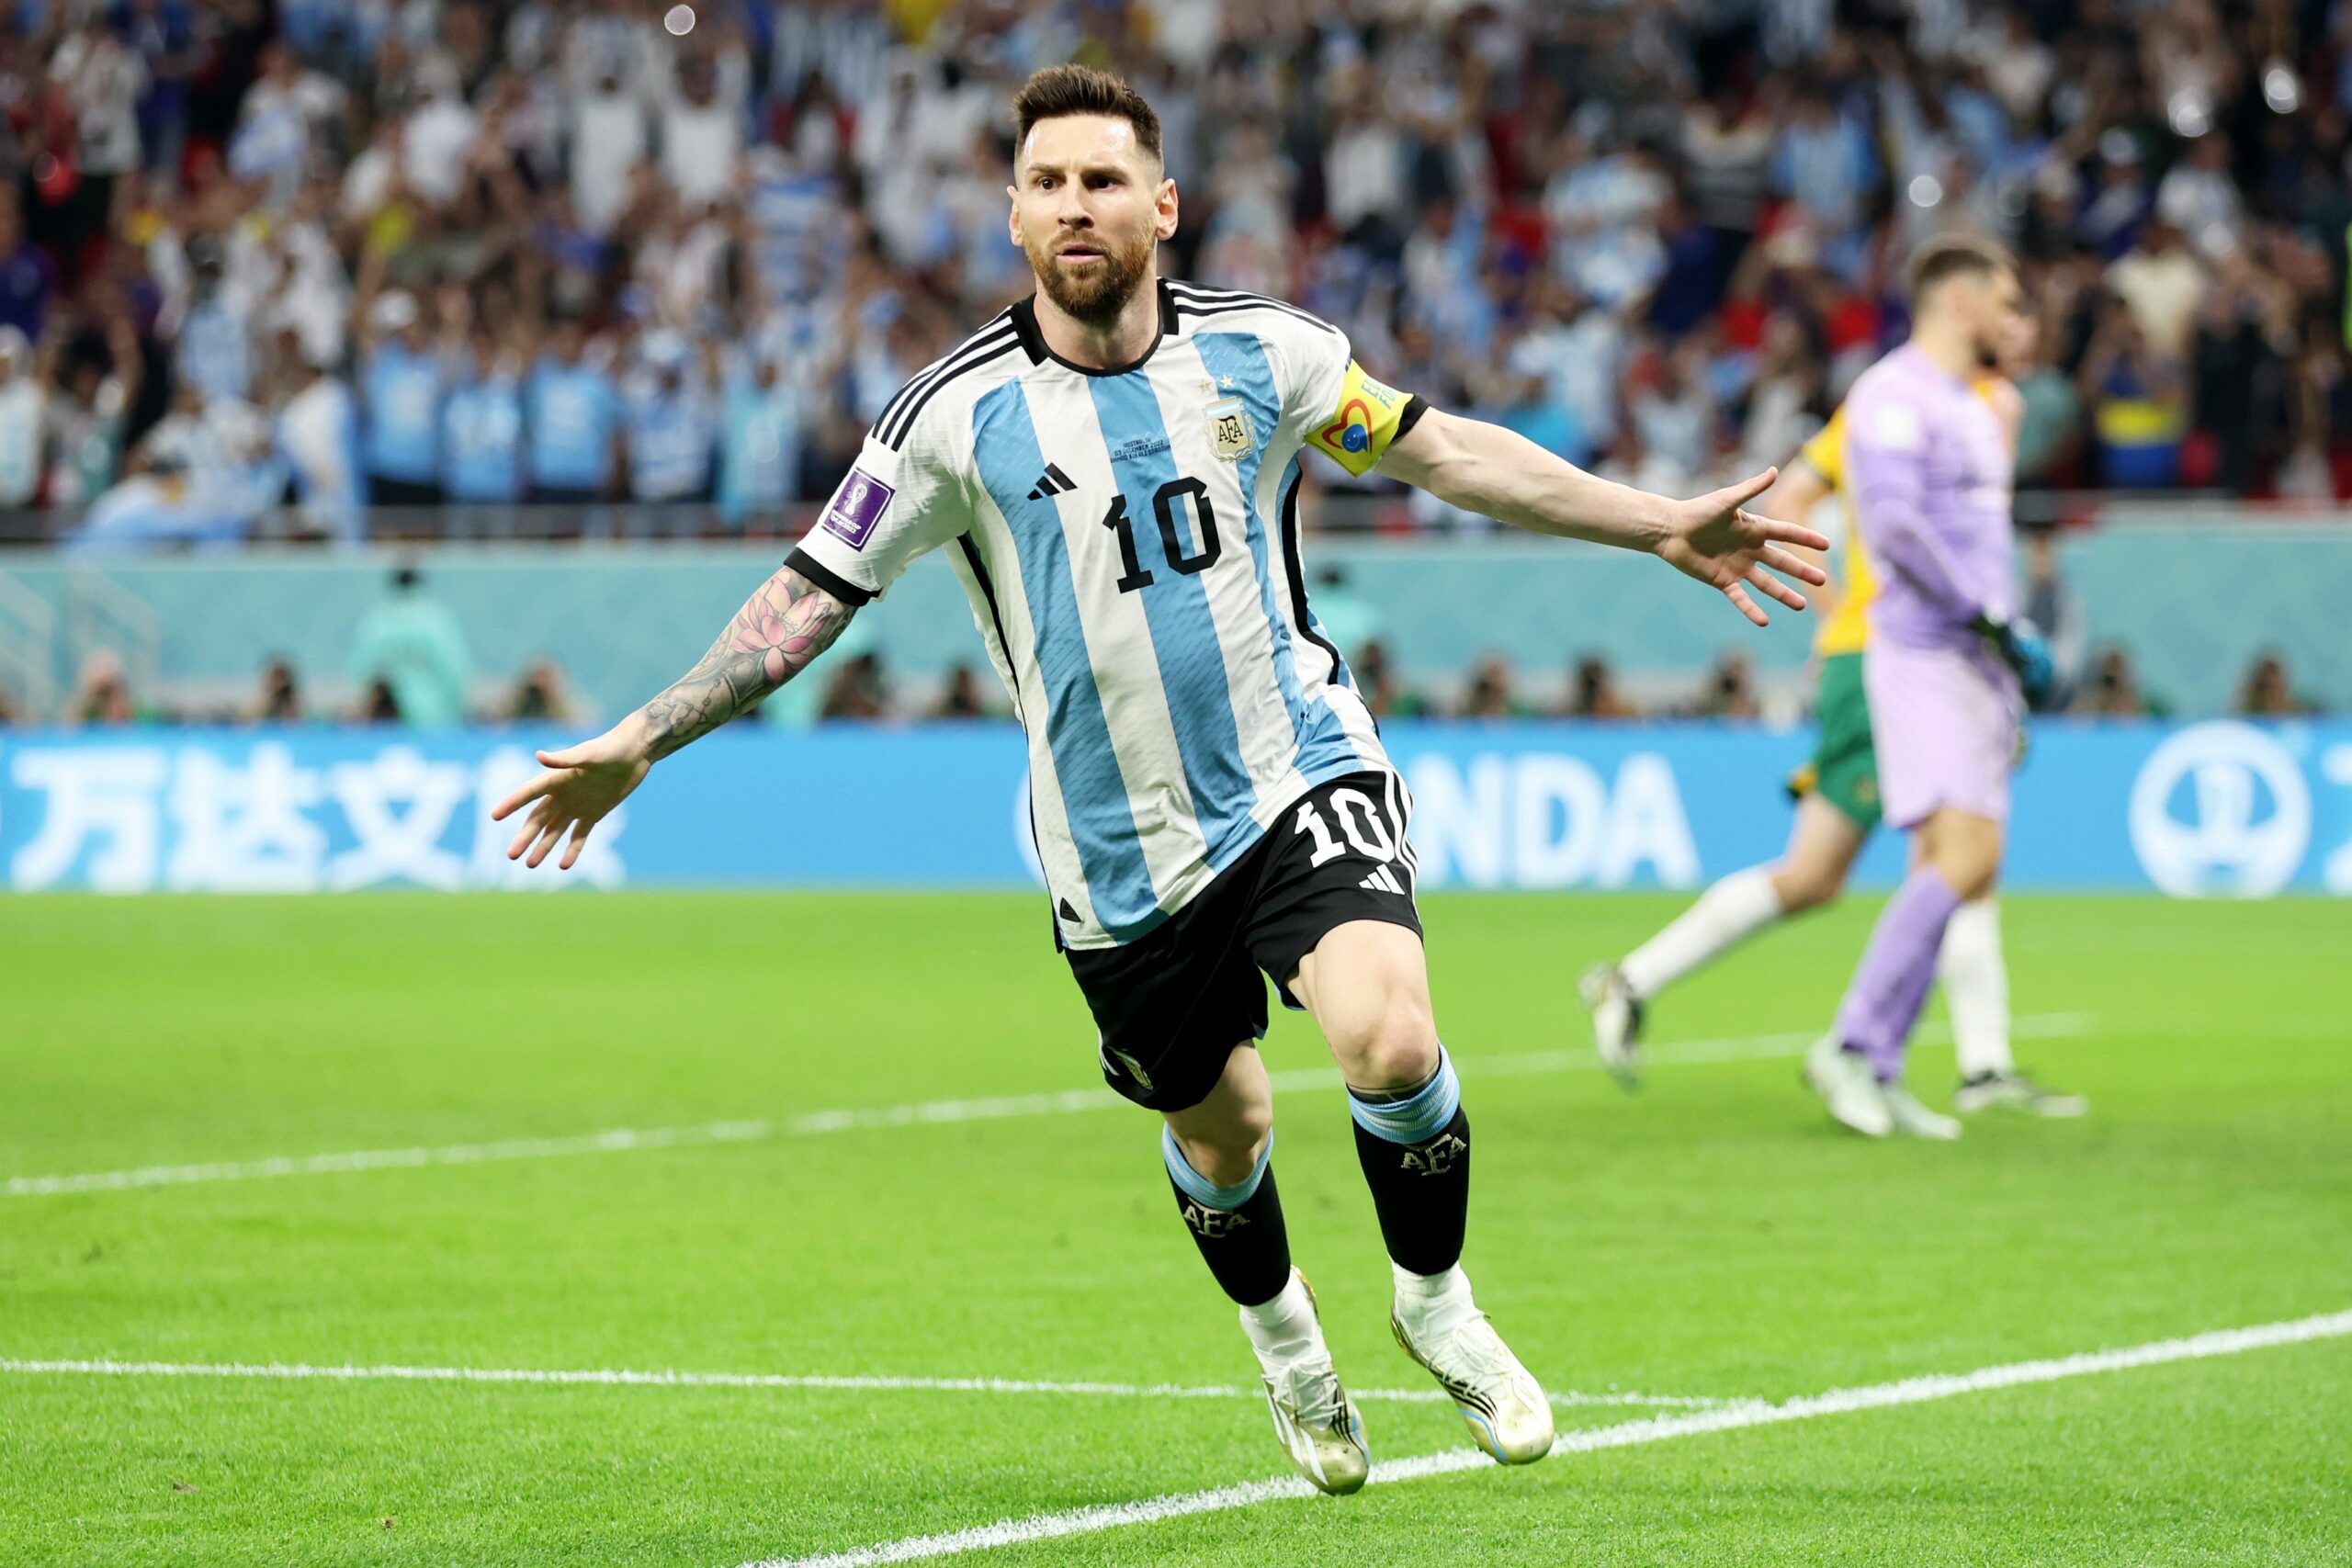 Qatar 2022: Messi the master as Argentina beat Netherlands in chaotic Qatar classic